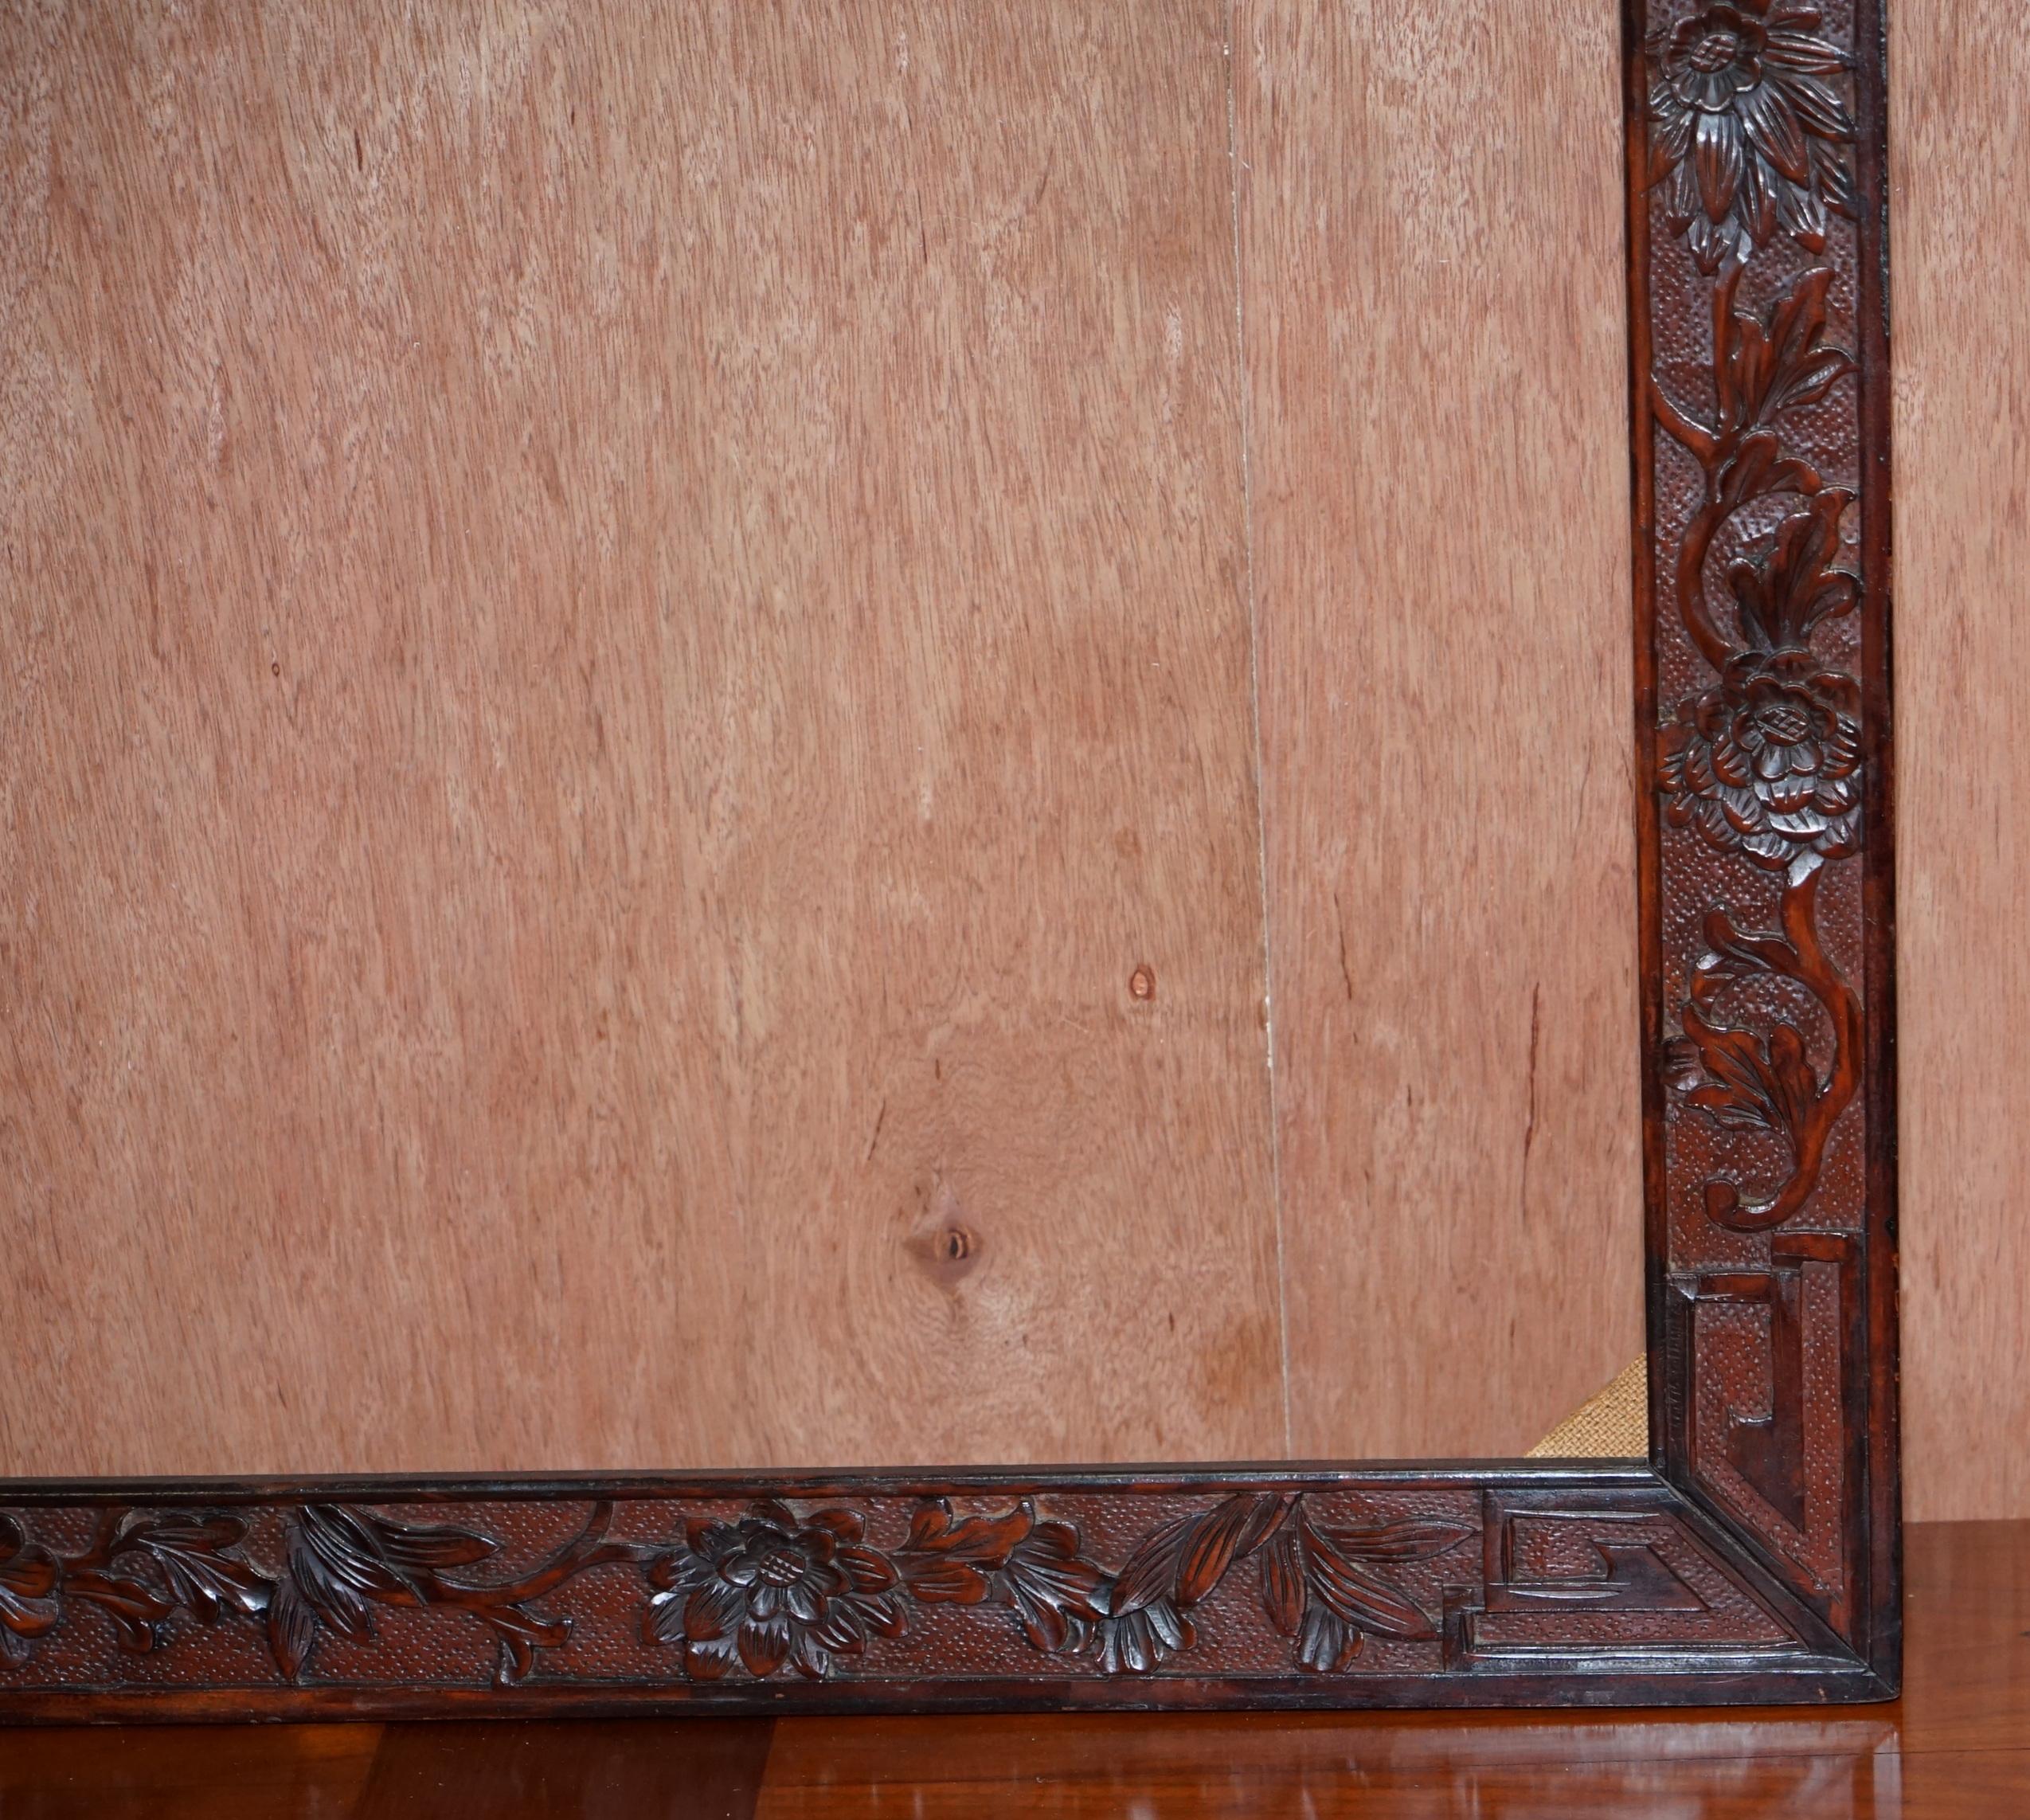 Pair of Chinese Export circa 1920 Hardwood Mirror or Picture Frames Floral Decor 10